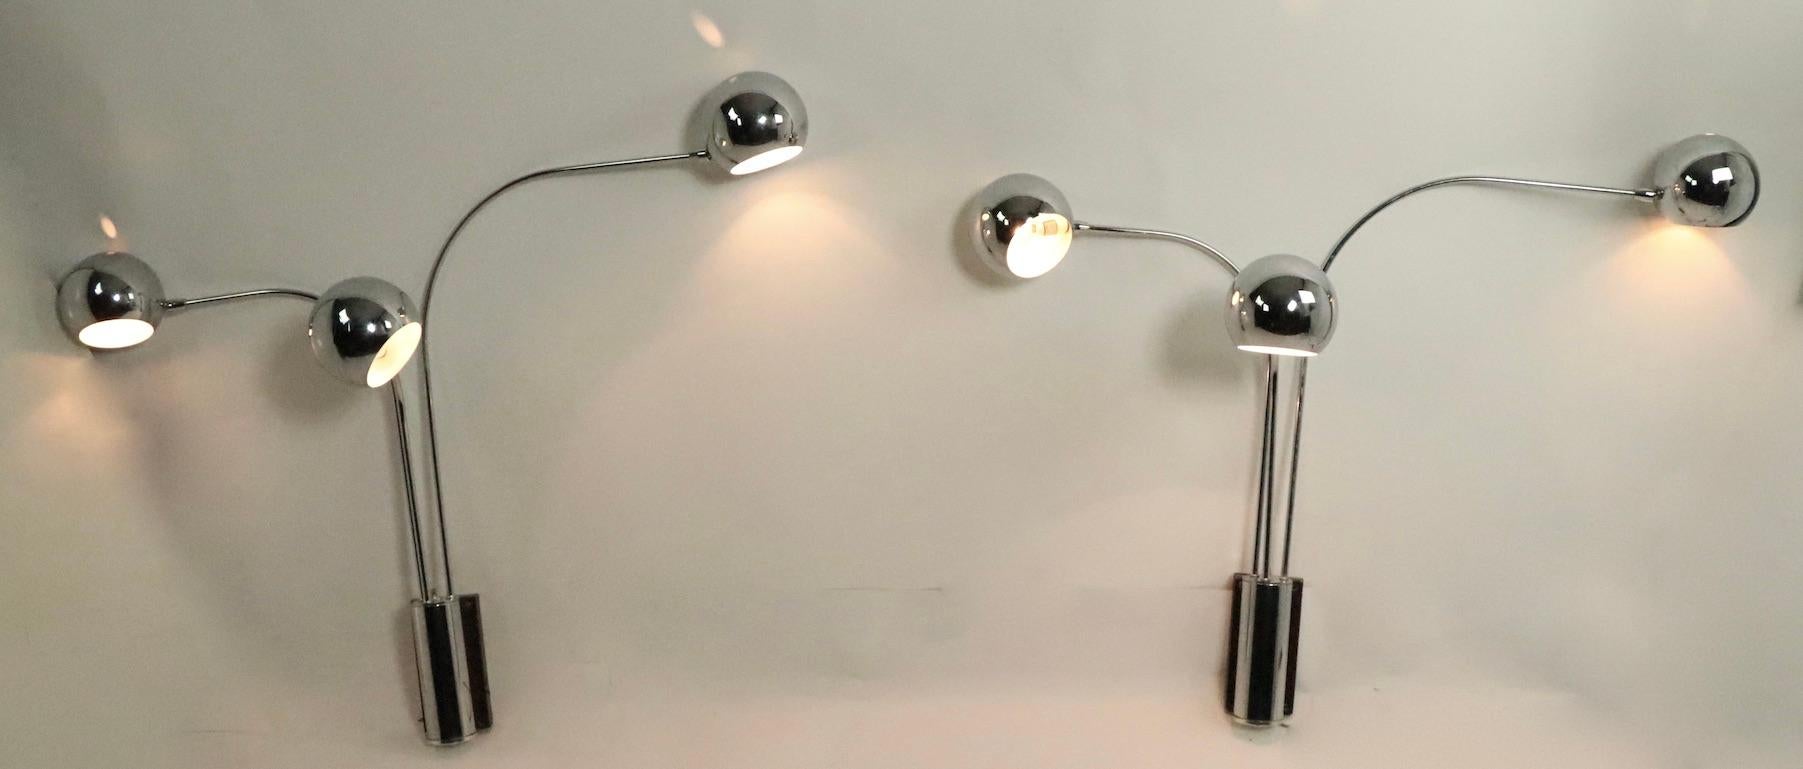 Pair of Mod Three-Arm Chrome Ball Sconces by Mutual Sunset For Sale 2